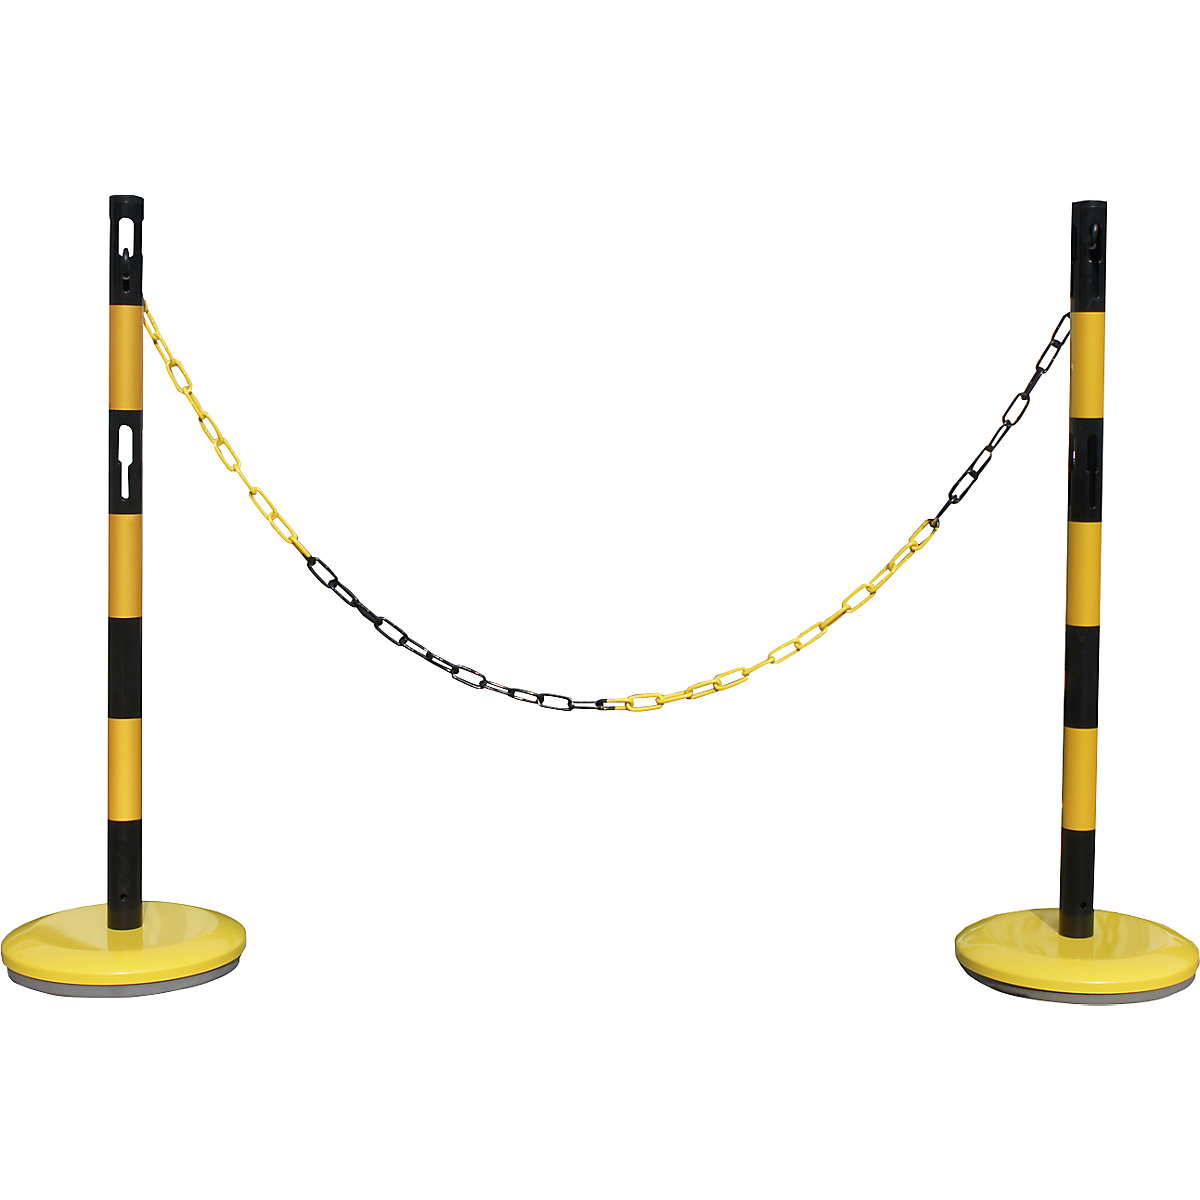 Barrier post set with chain – VISO, 2 posts, 2.5 m chain, yellow / black-5